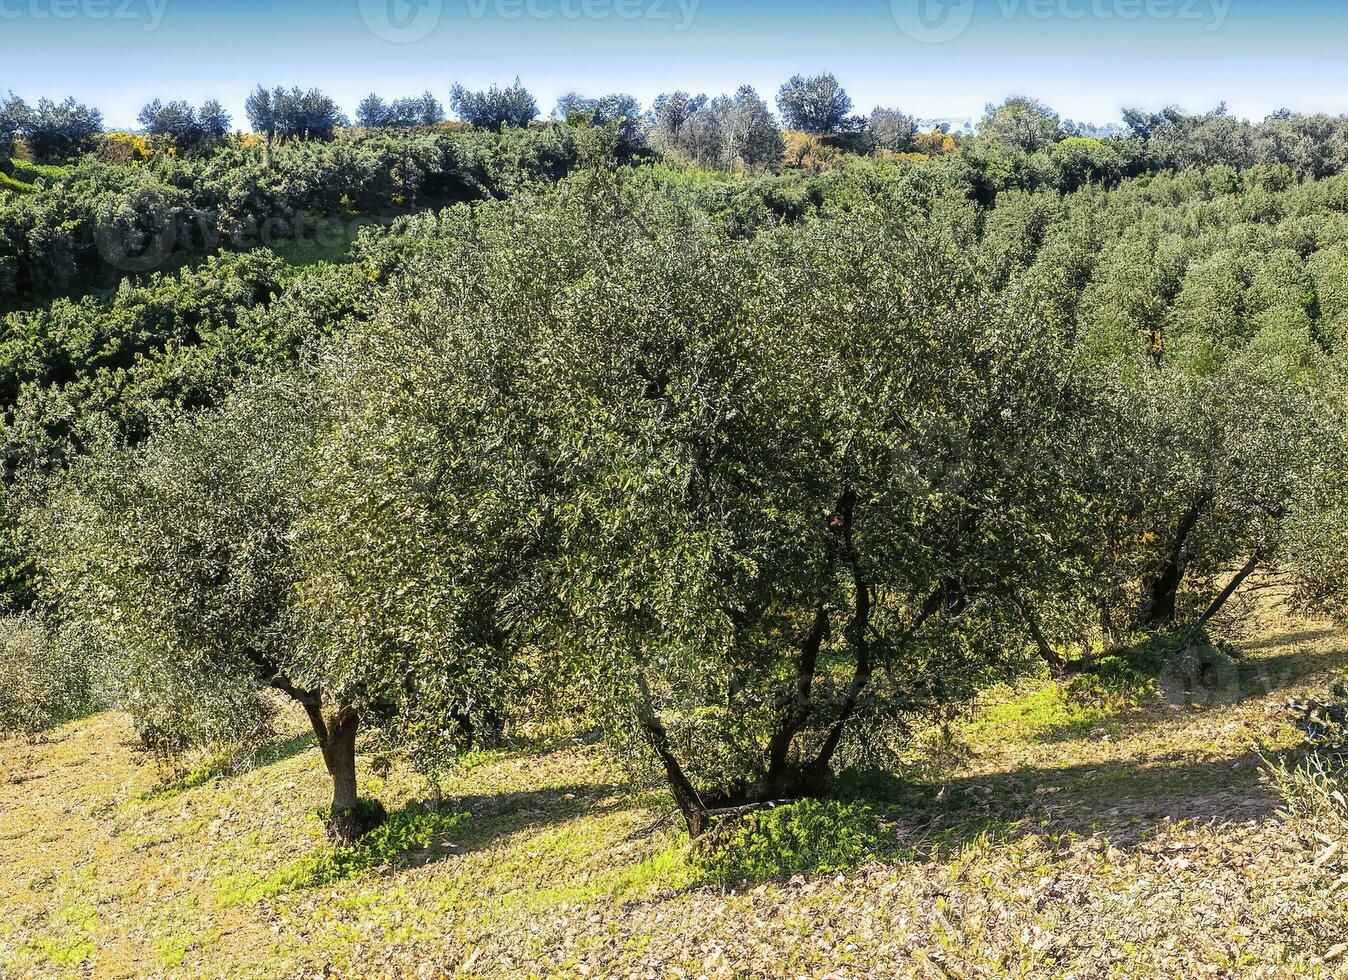 Italian projects using olive trees to produce olive oil photo